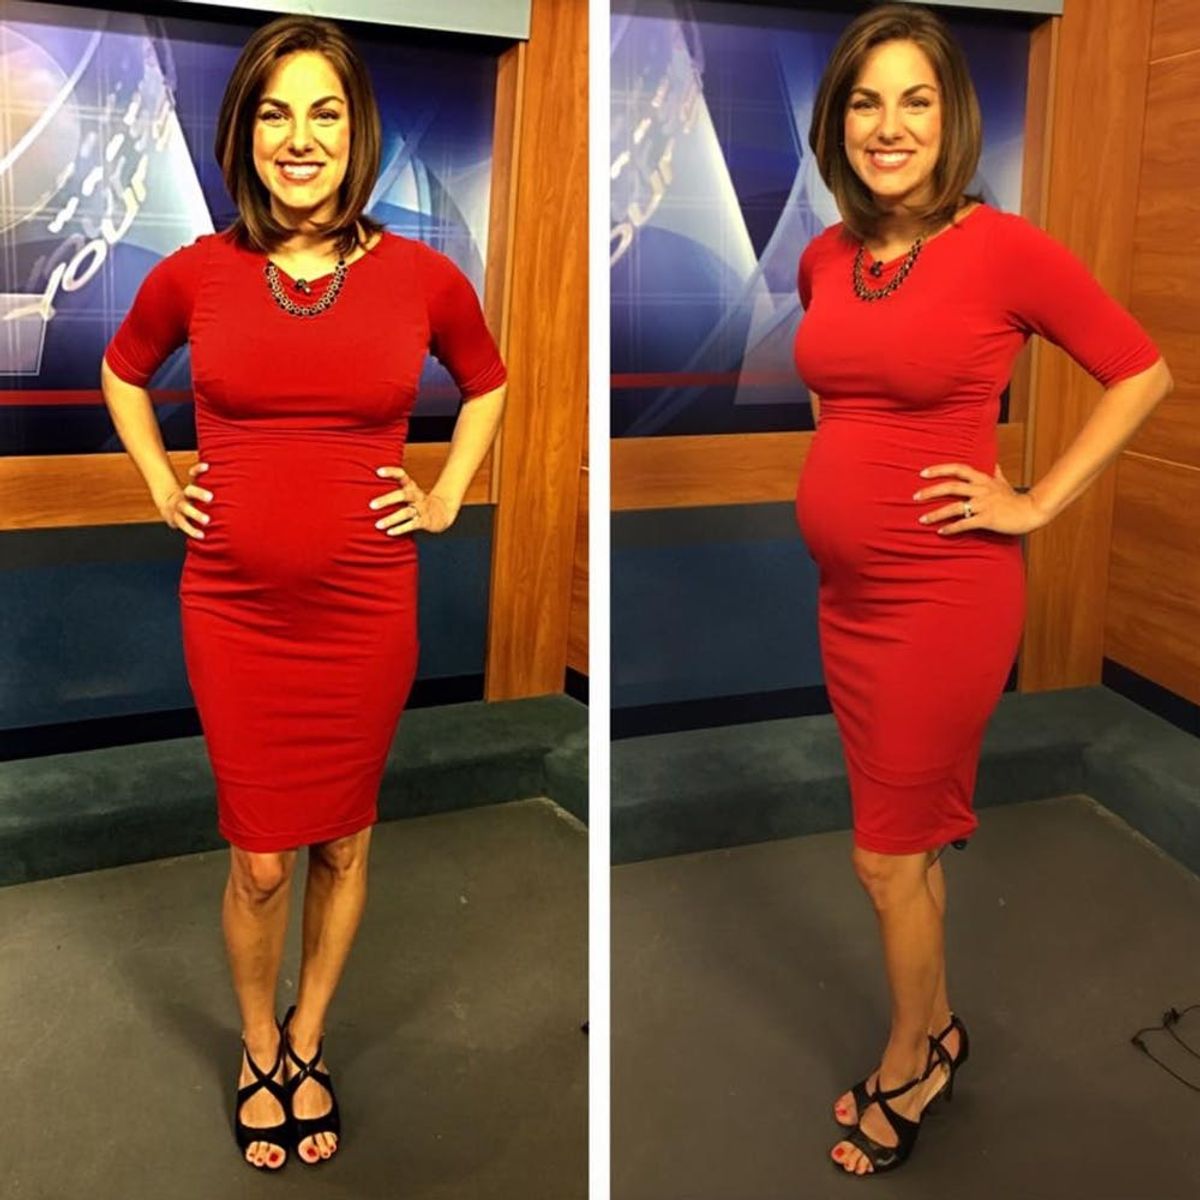 A Pregnant News Anchor Clapped Back at Body Shamers in the Best Way